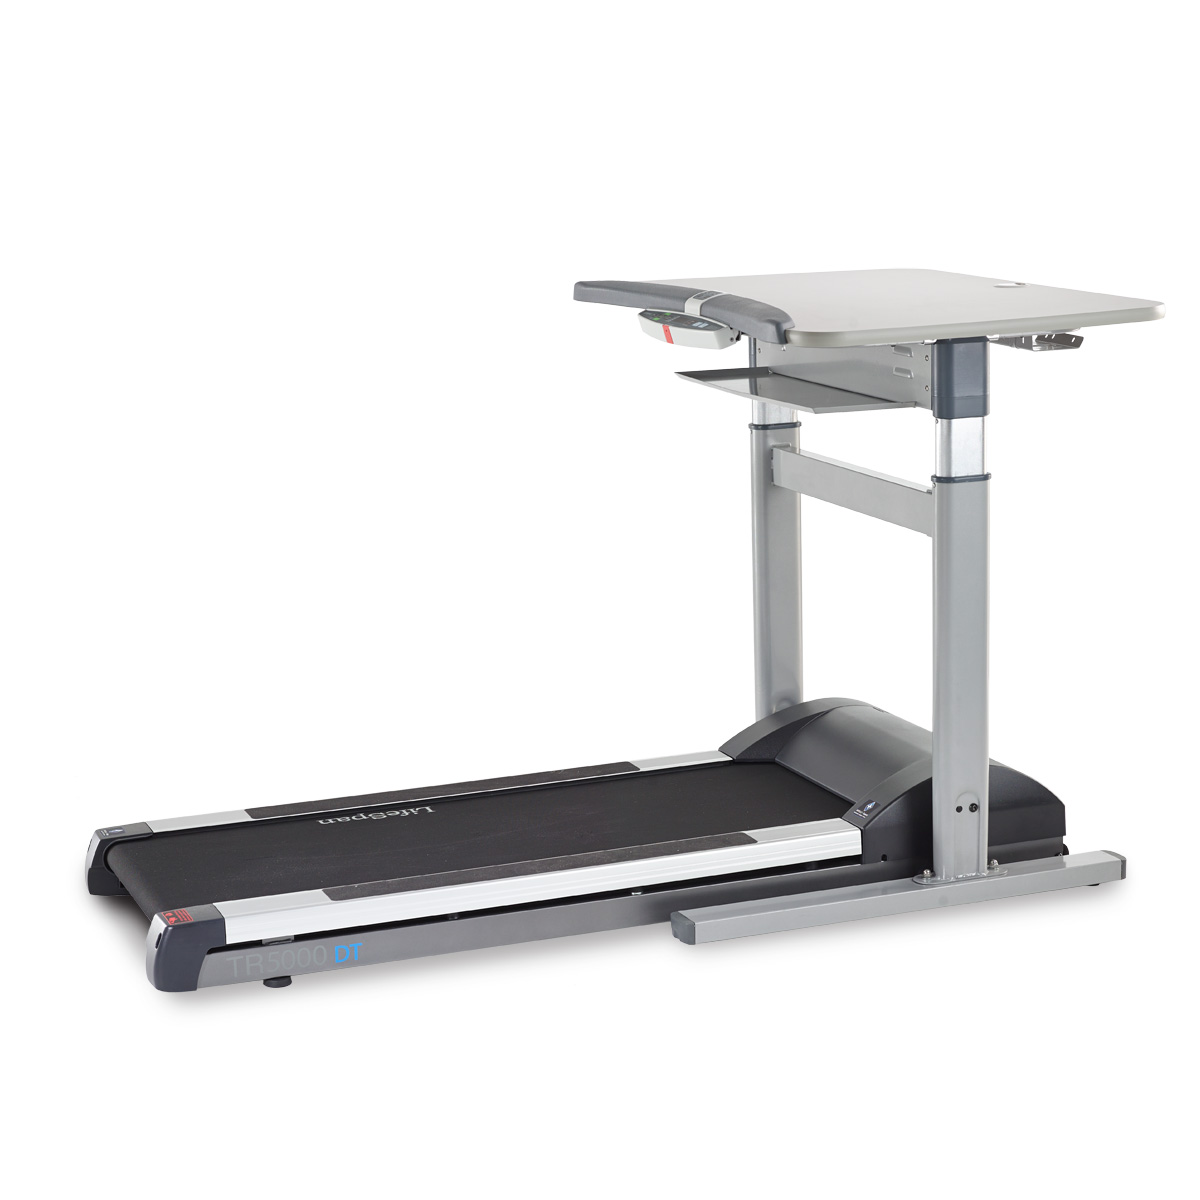 Review of LifeSpan TR1200-DT5 Treadmill Desk